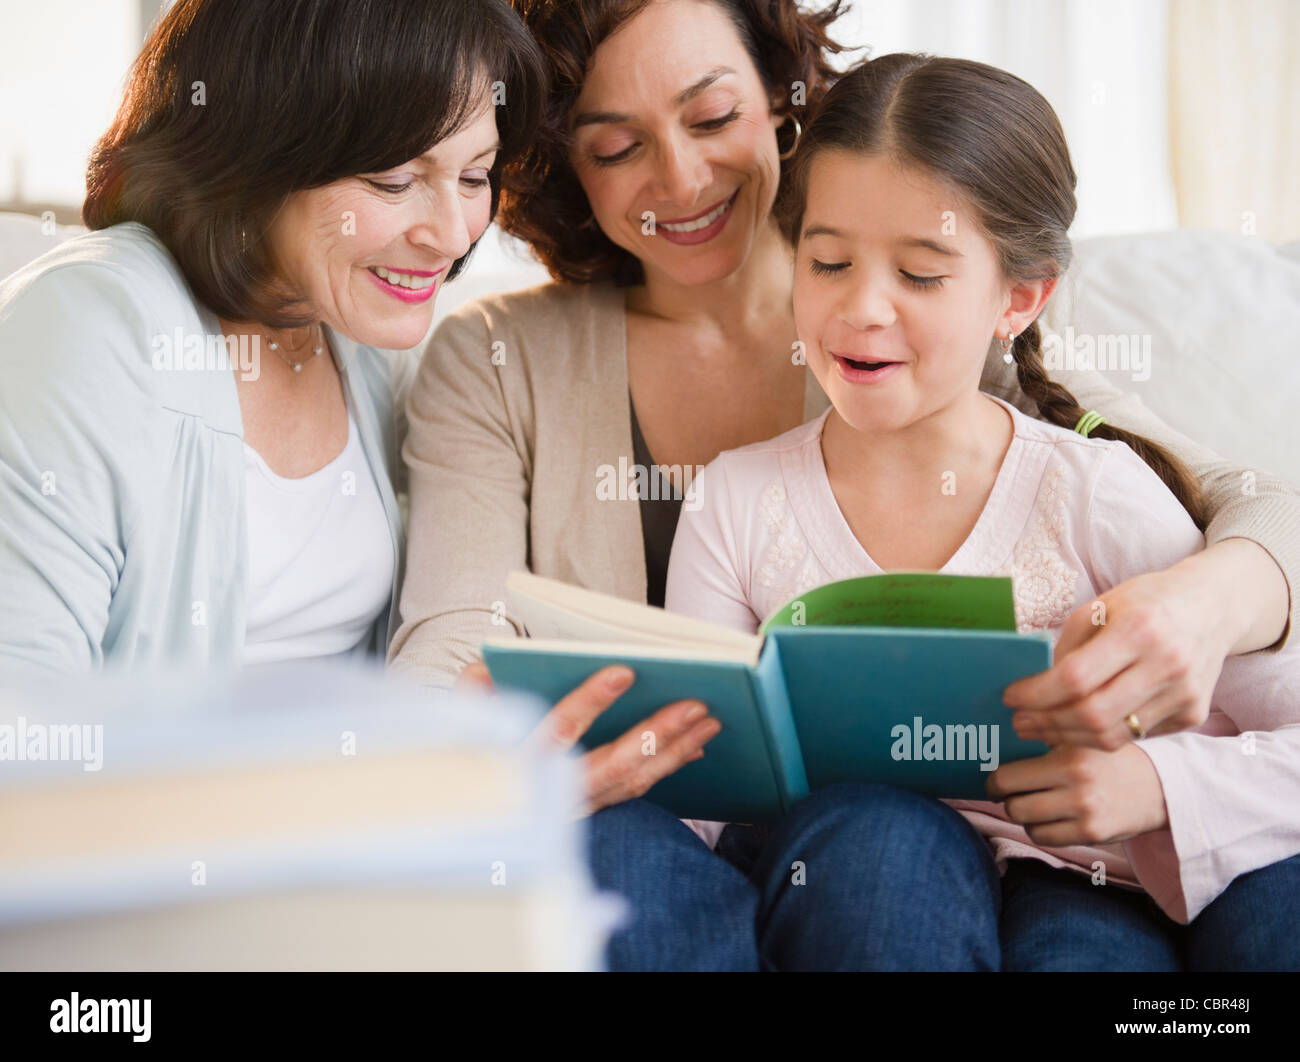 Family reading book together Stock Photo